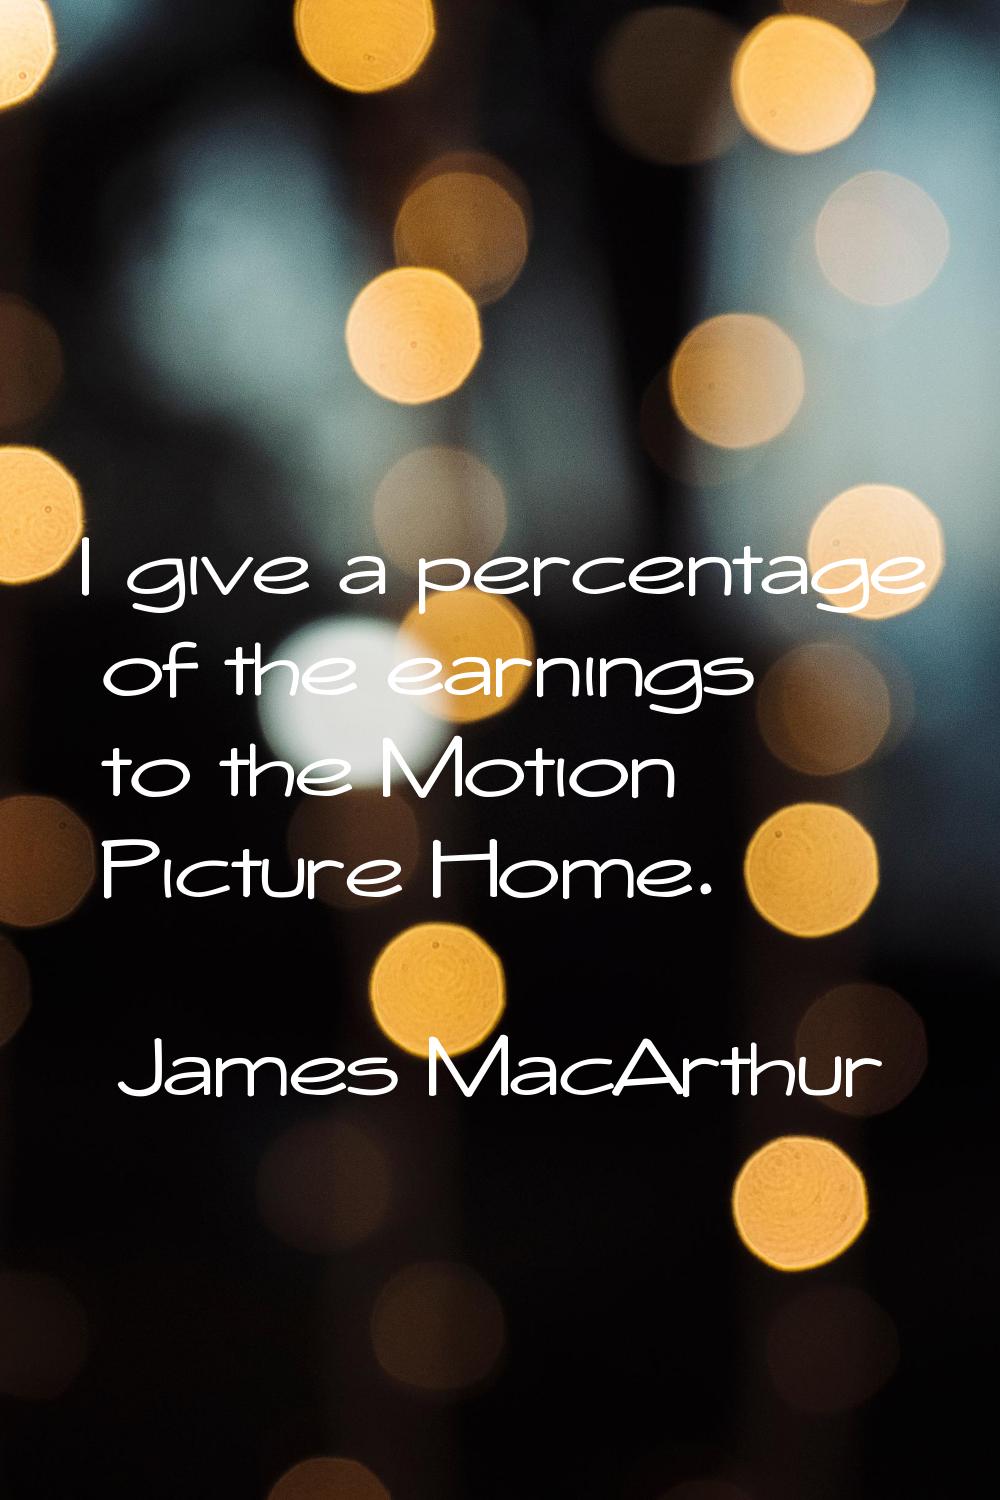 I give a percentage of the earnings to the Motion Picture Home.